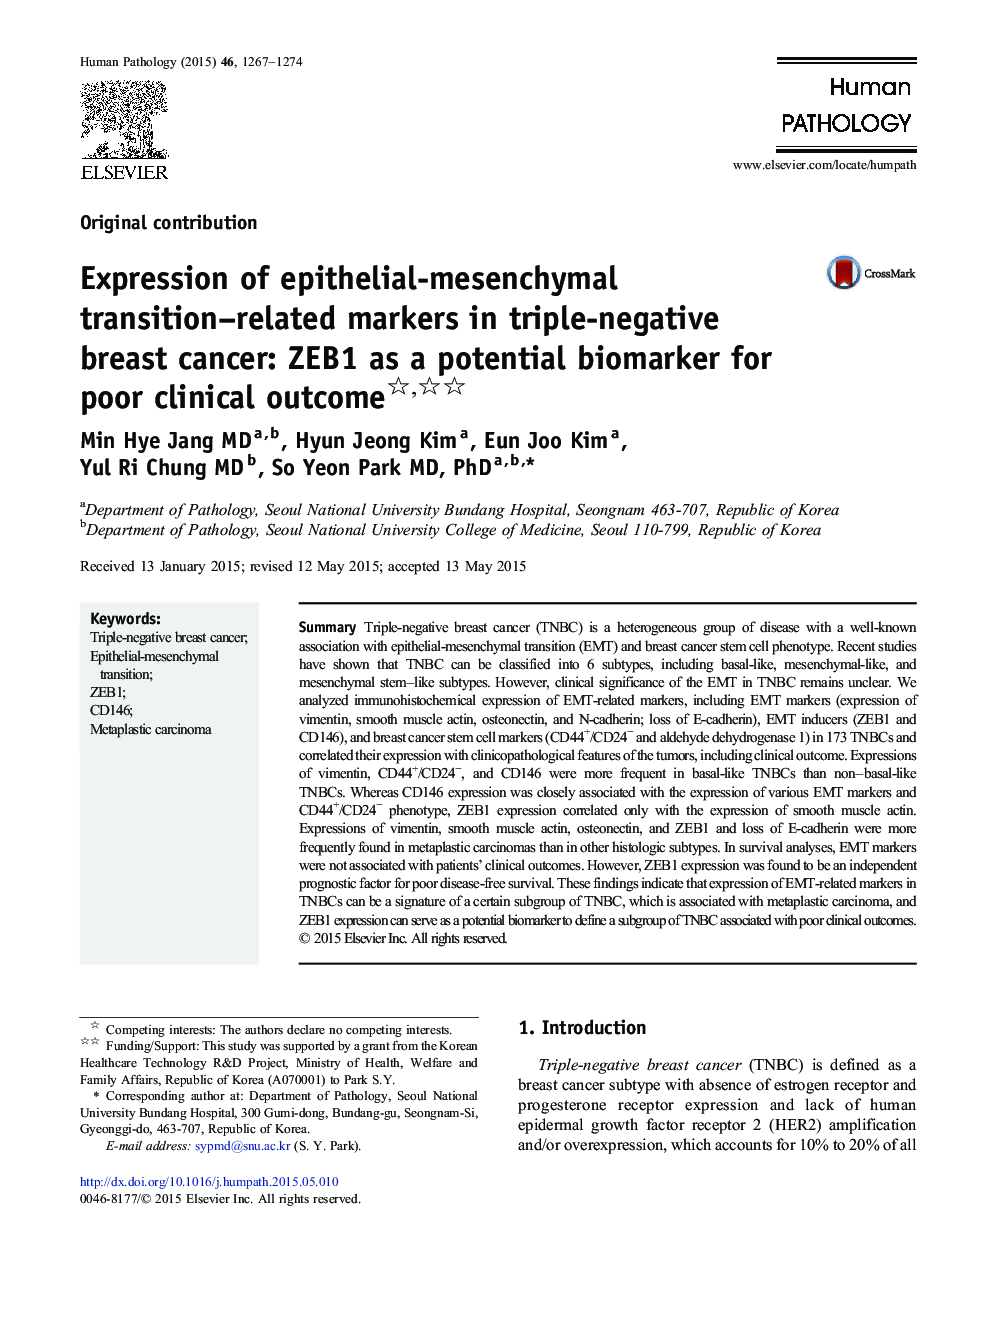 Expression of epithelial-mesenchymal transition–related markers in triple-negative breast cancer: ZEB1 as a potential biomarker for poor clinical outcome 